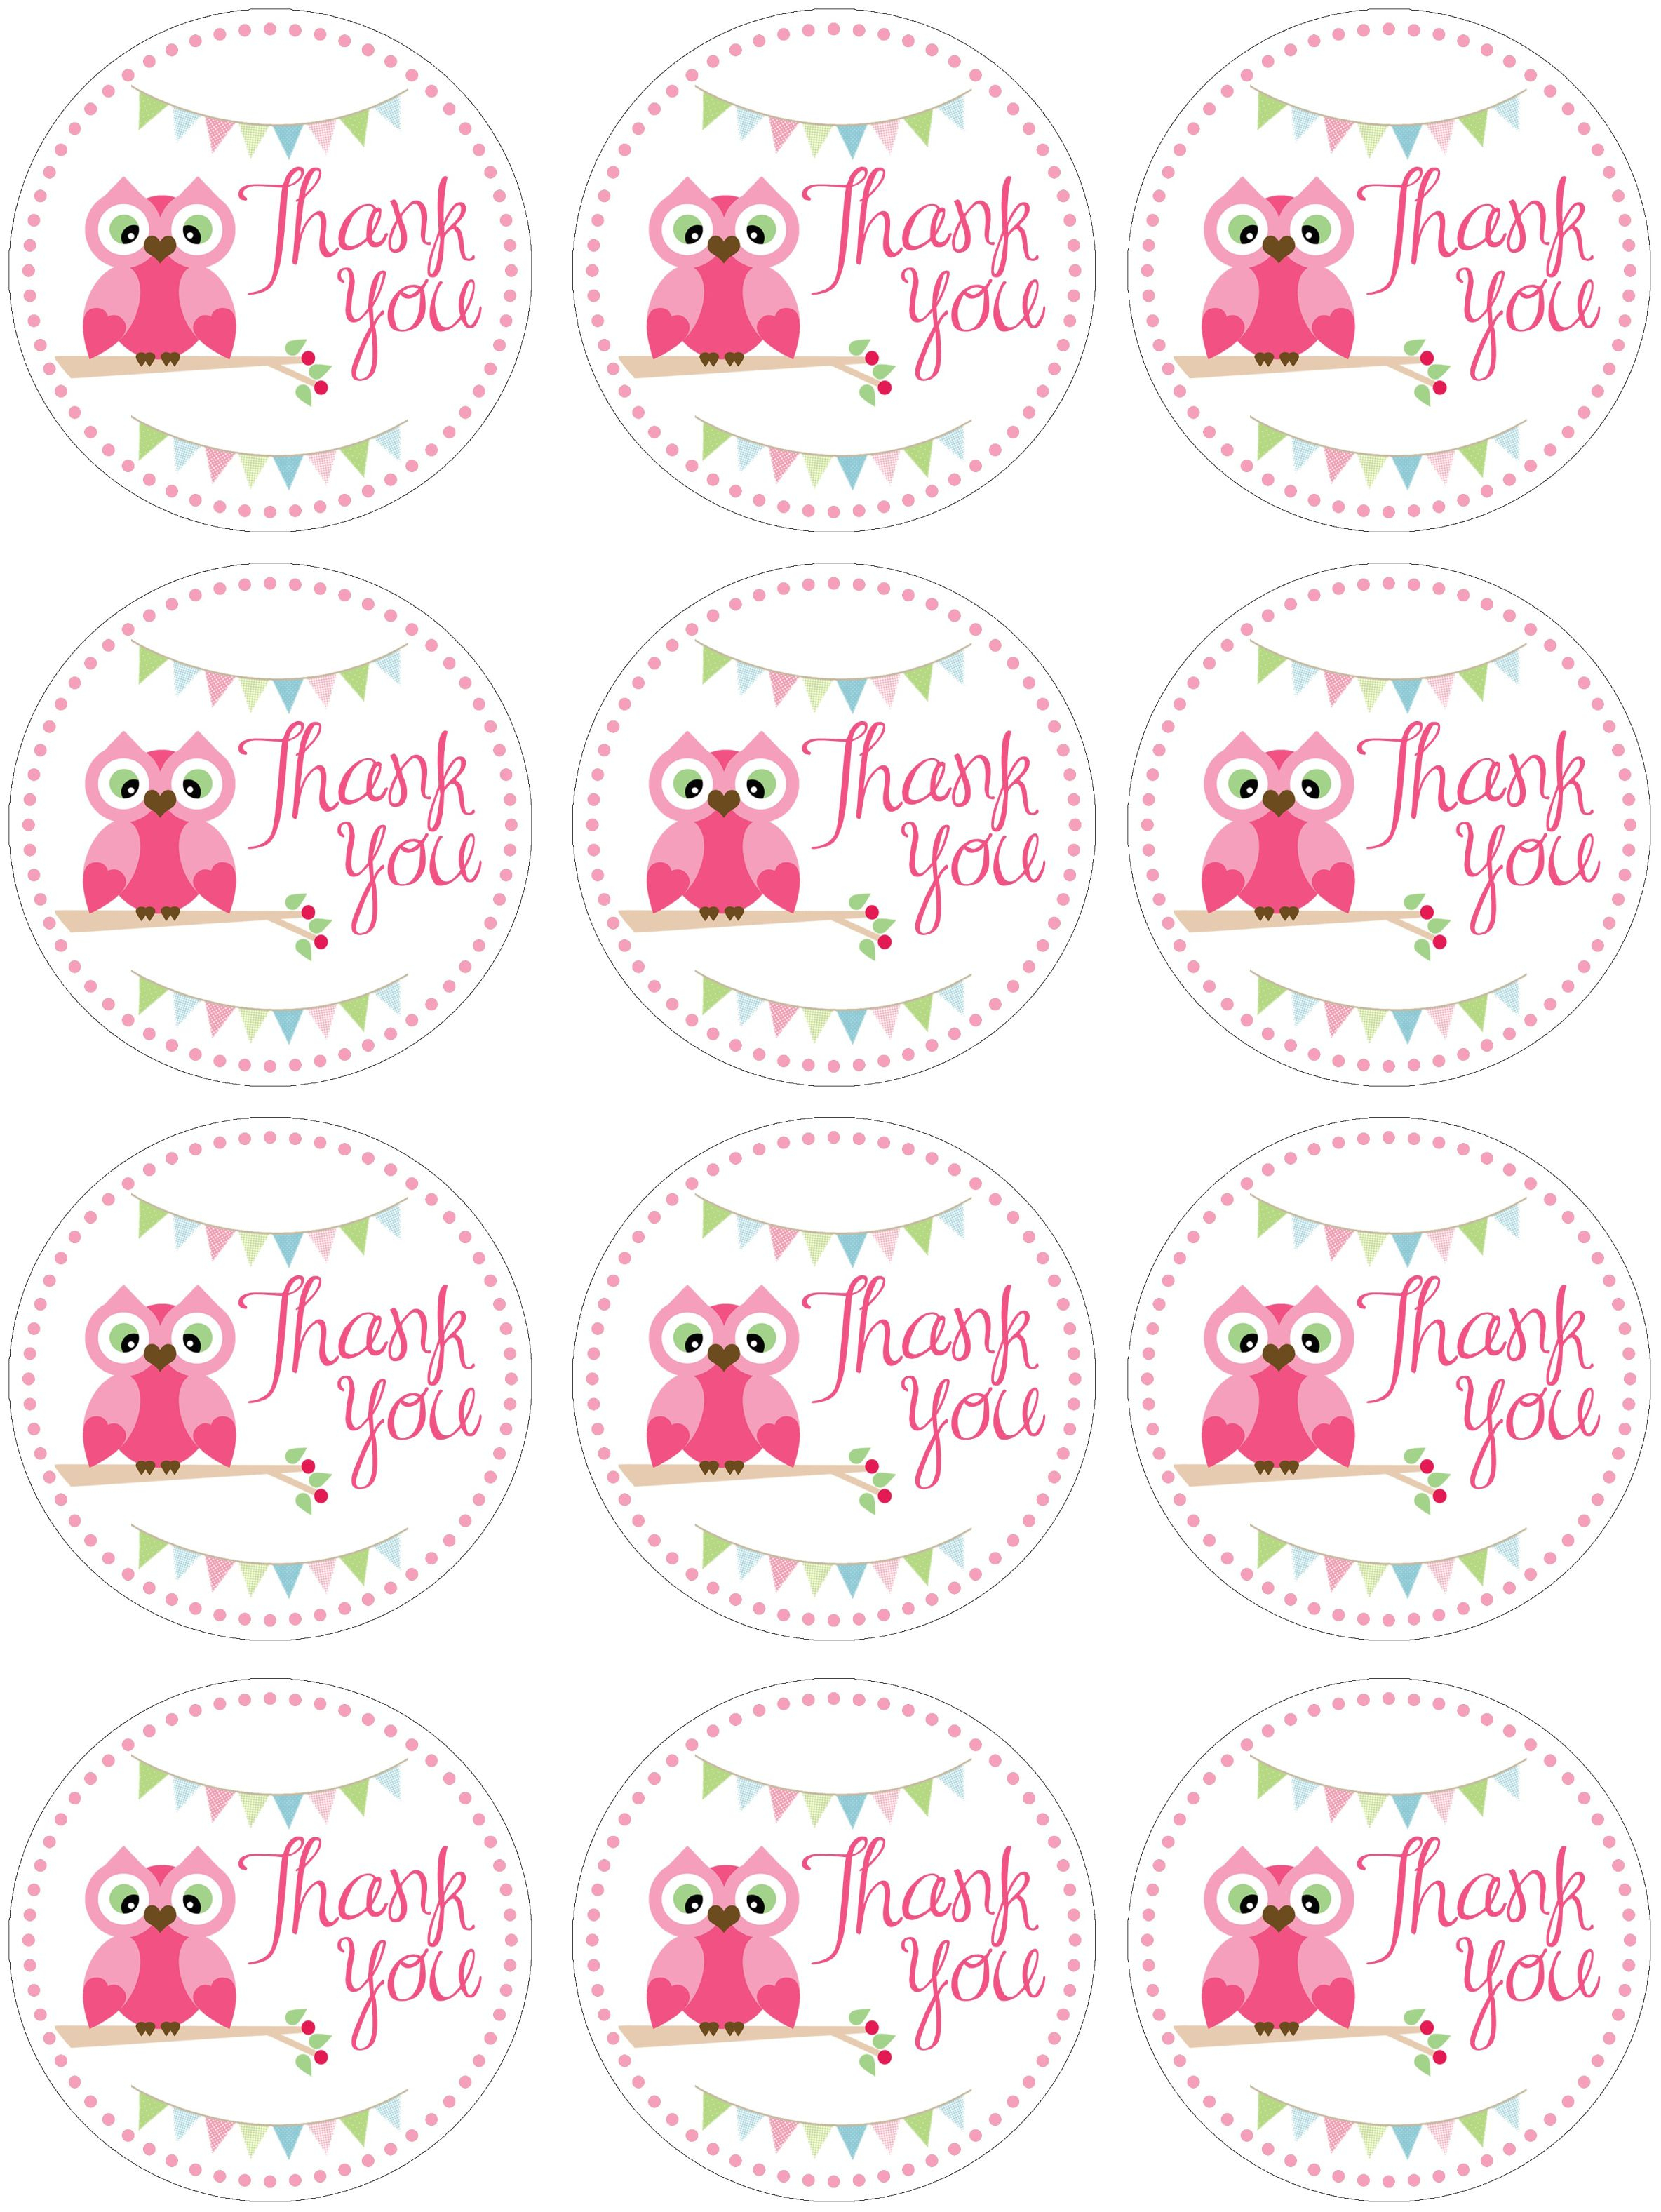 Owl Birthday Party With Free Printables | תגיות -Labels - Free Printable Thank You Tags For Birthday Favors